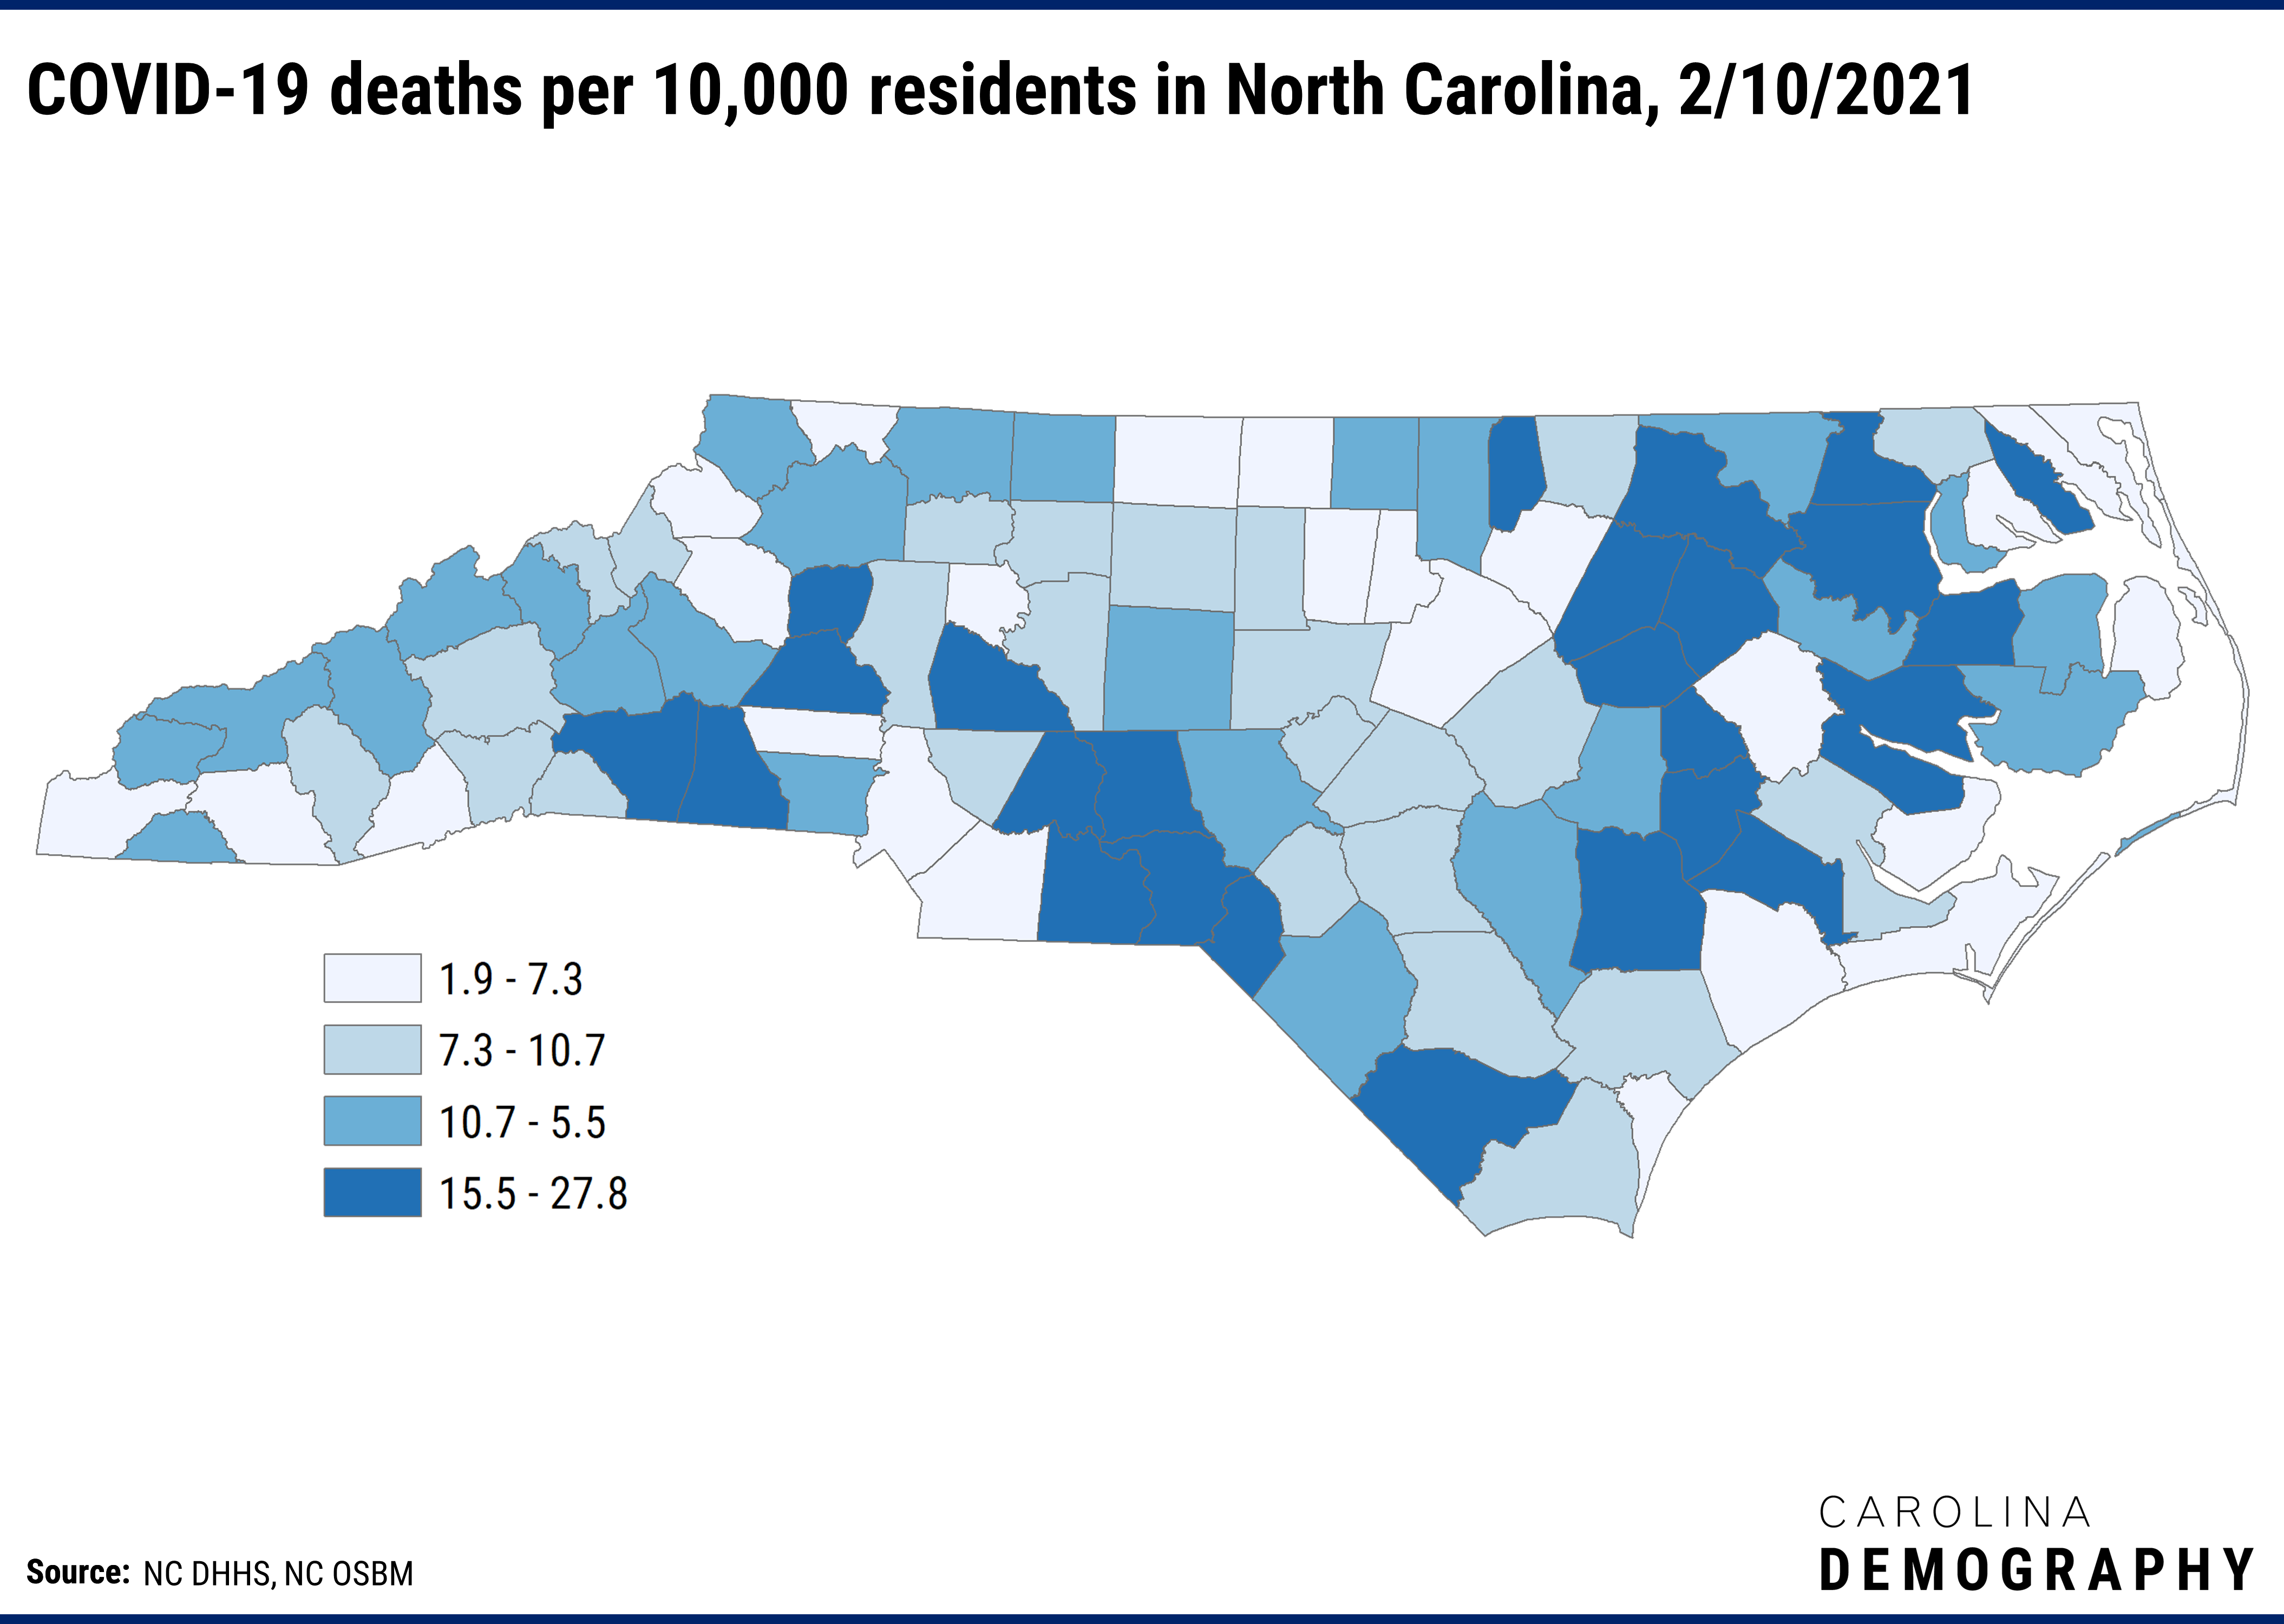 Map of NC showing concentrations of deaths by COVID-19